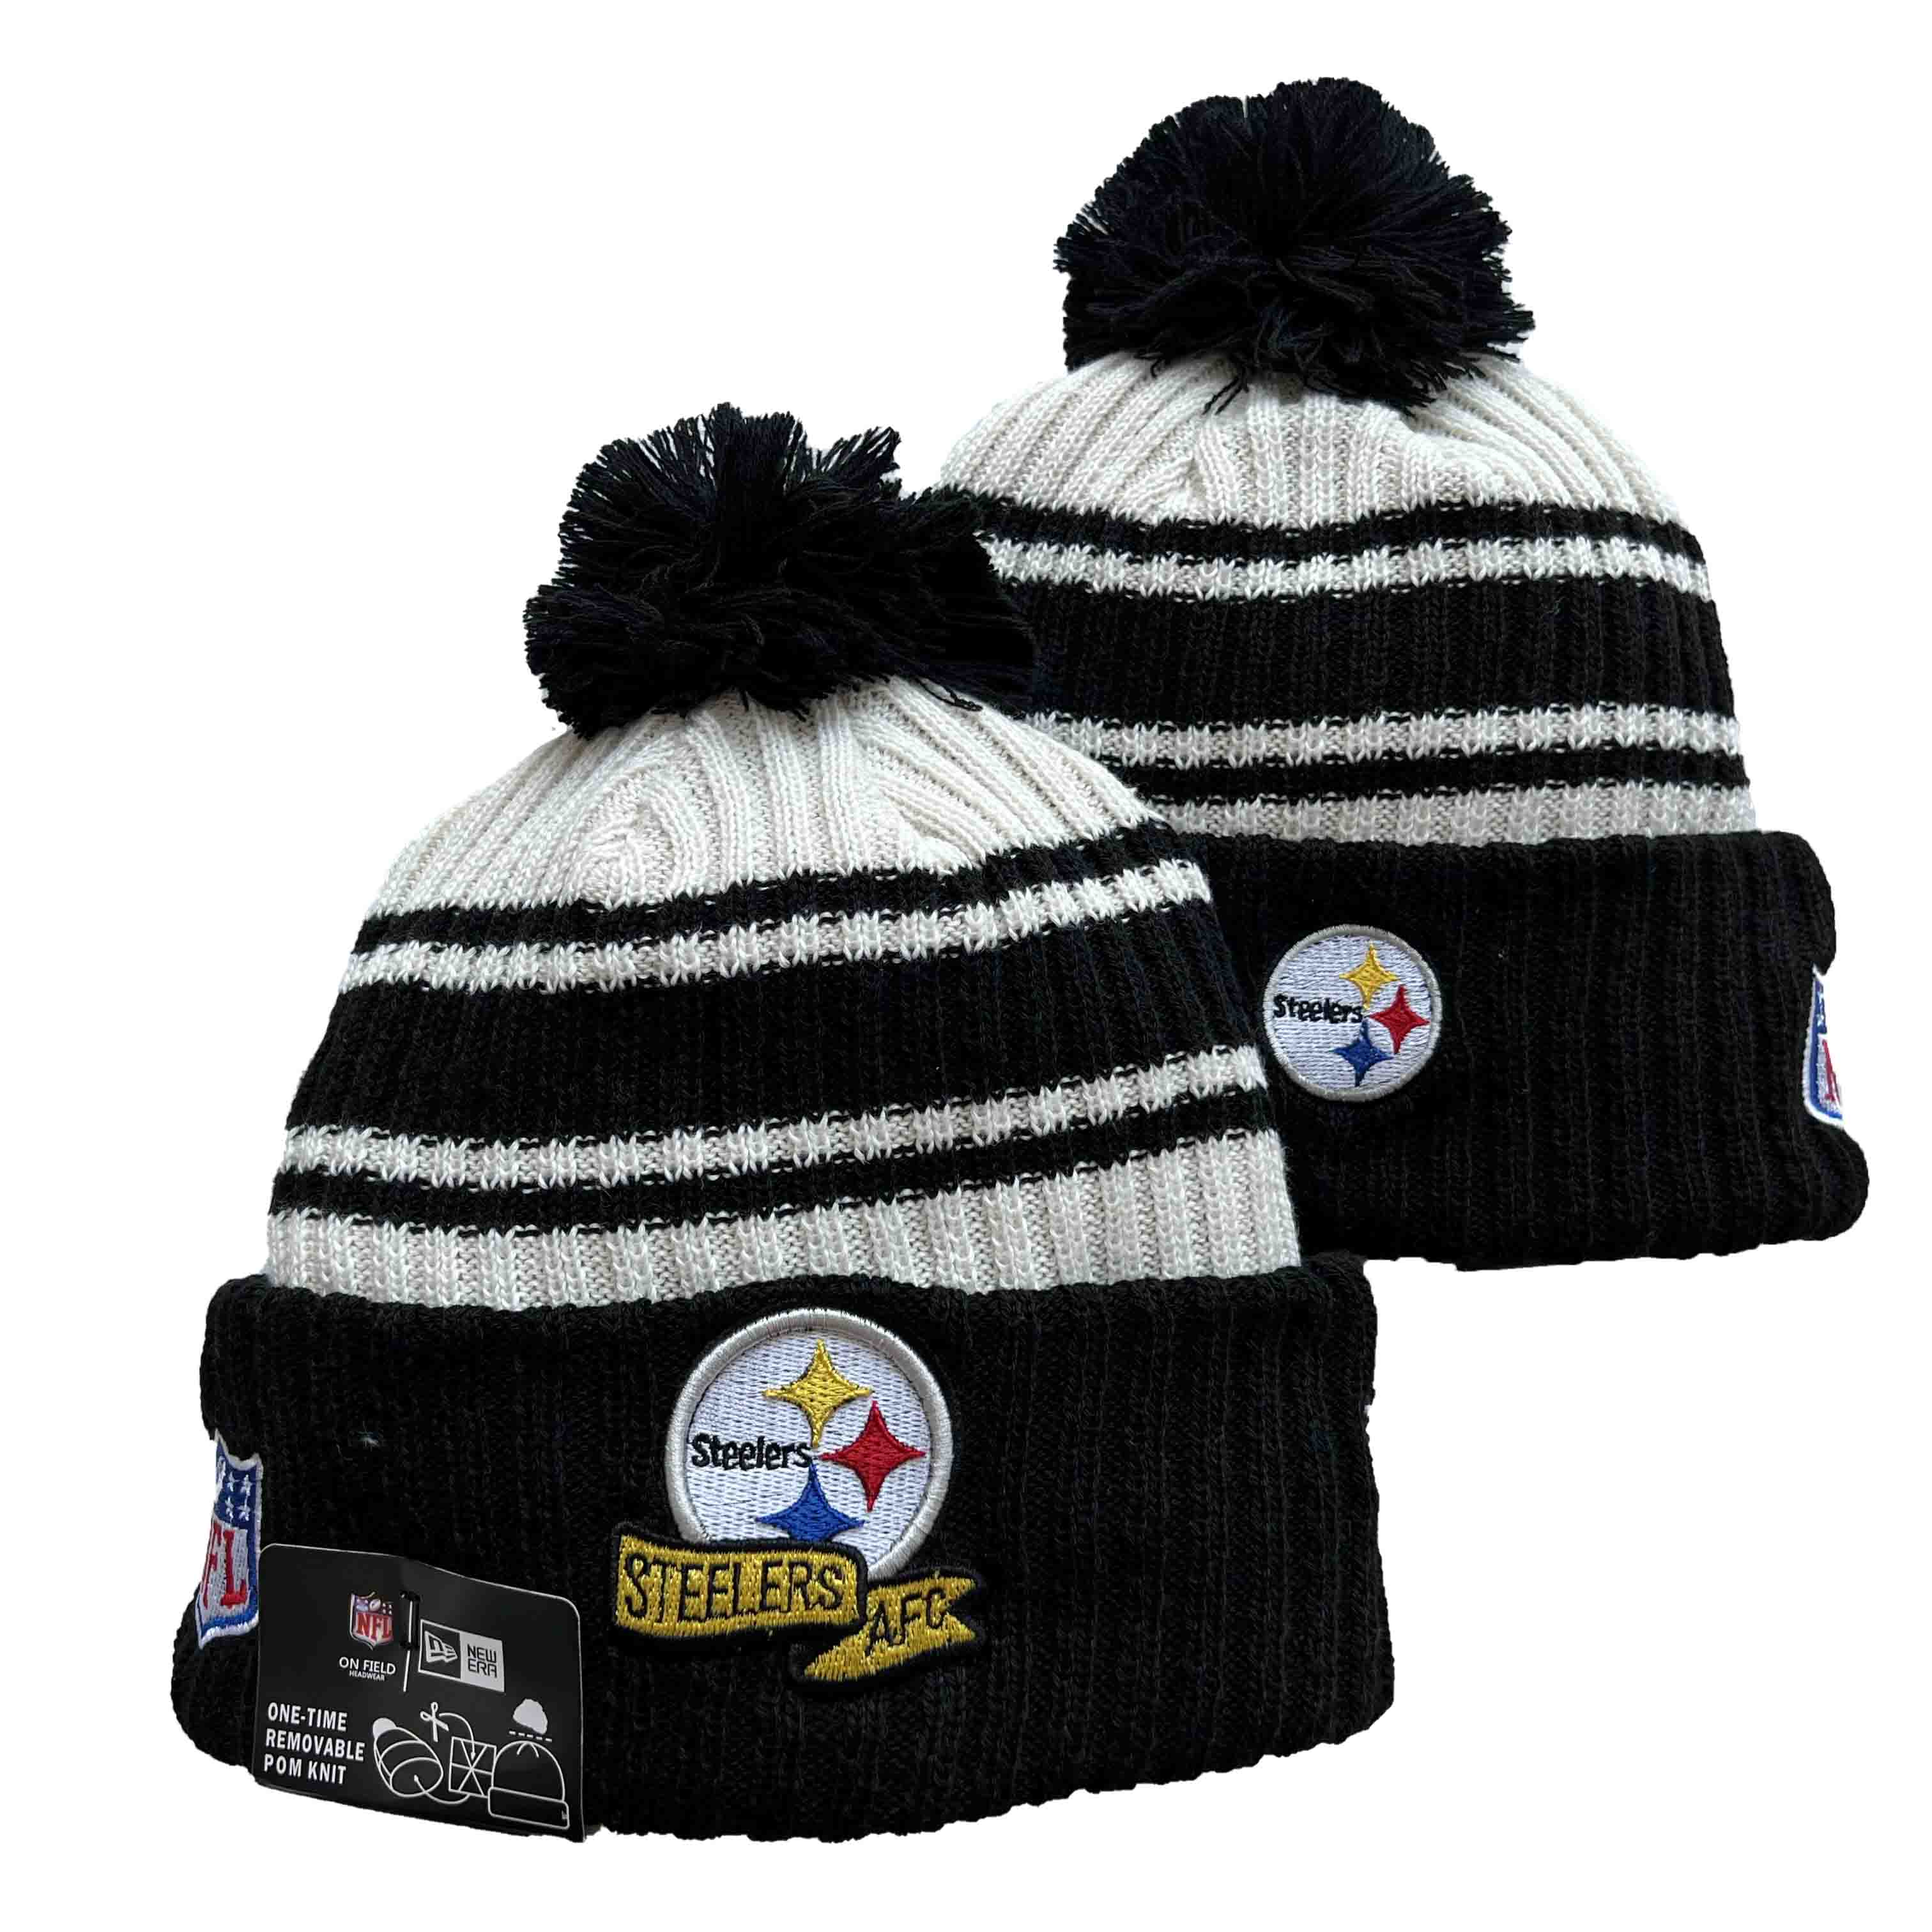 NFL Pittsburgh Steelers Beanies Knit Hats-YD1164